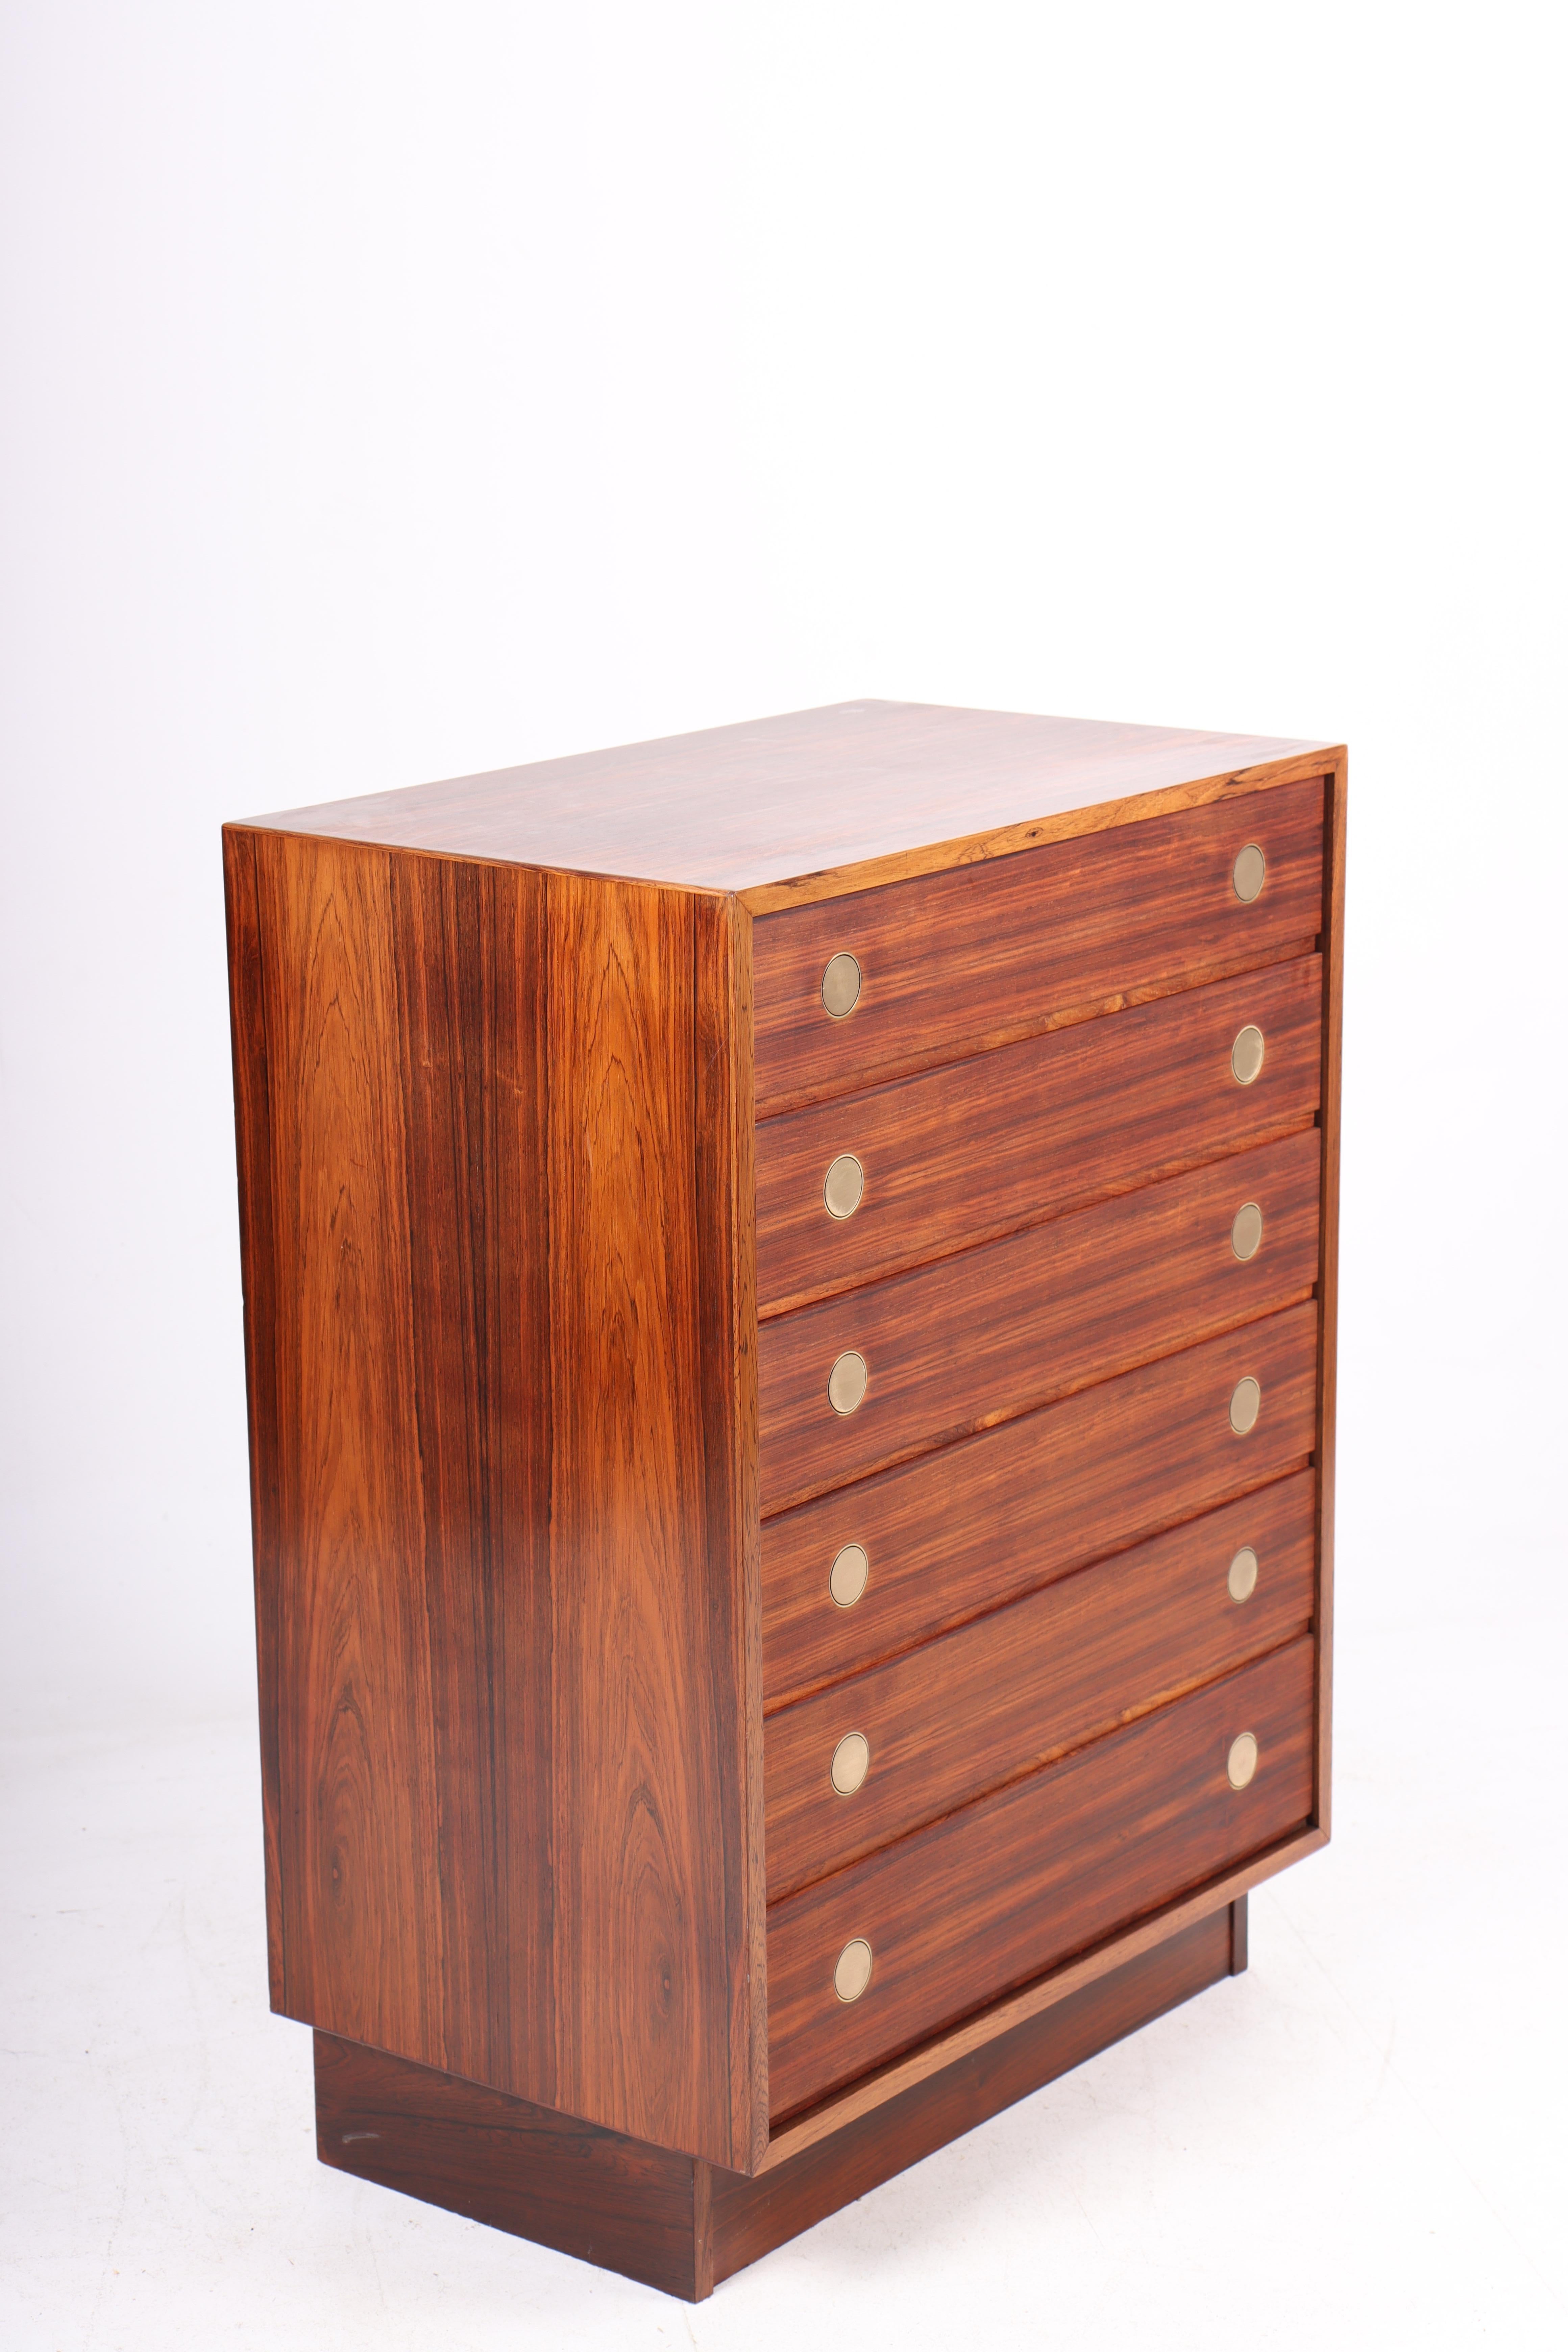 Scandinavian Modern Mid-Century Chest of Drawers in Rosewood Designed by Dyrlund, 1960s For Sale